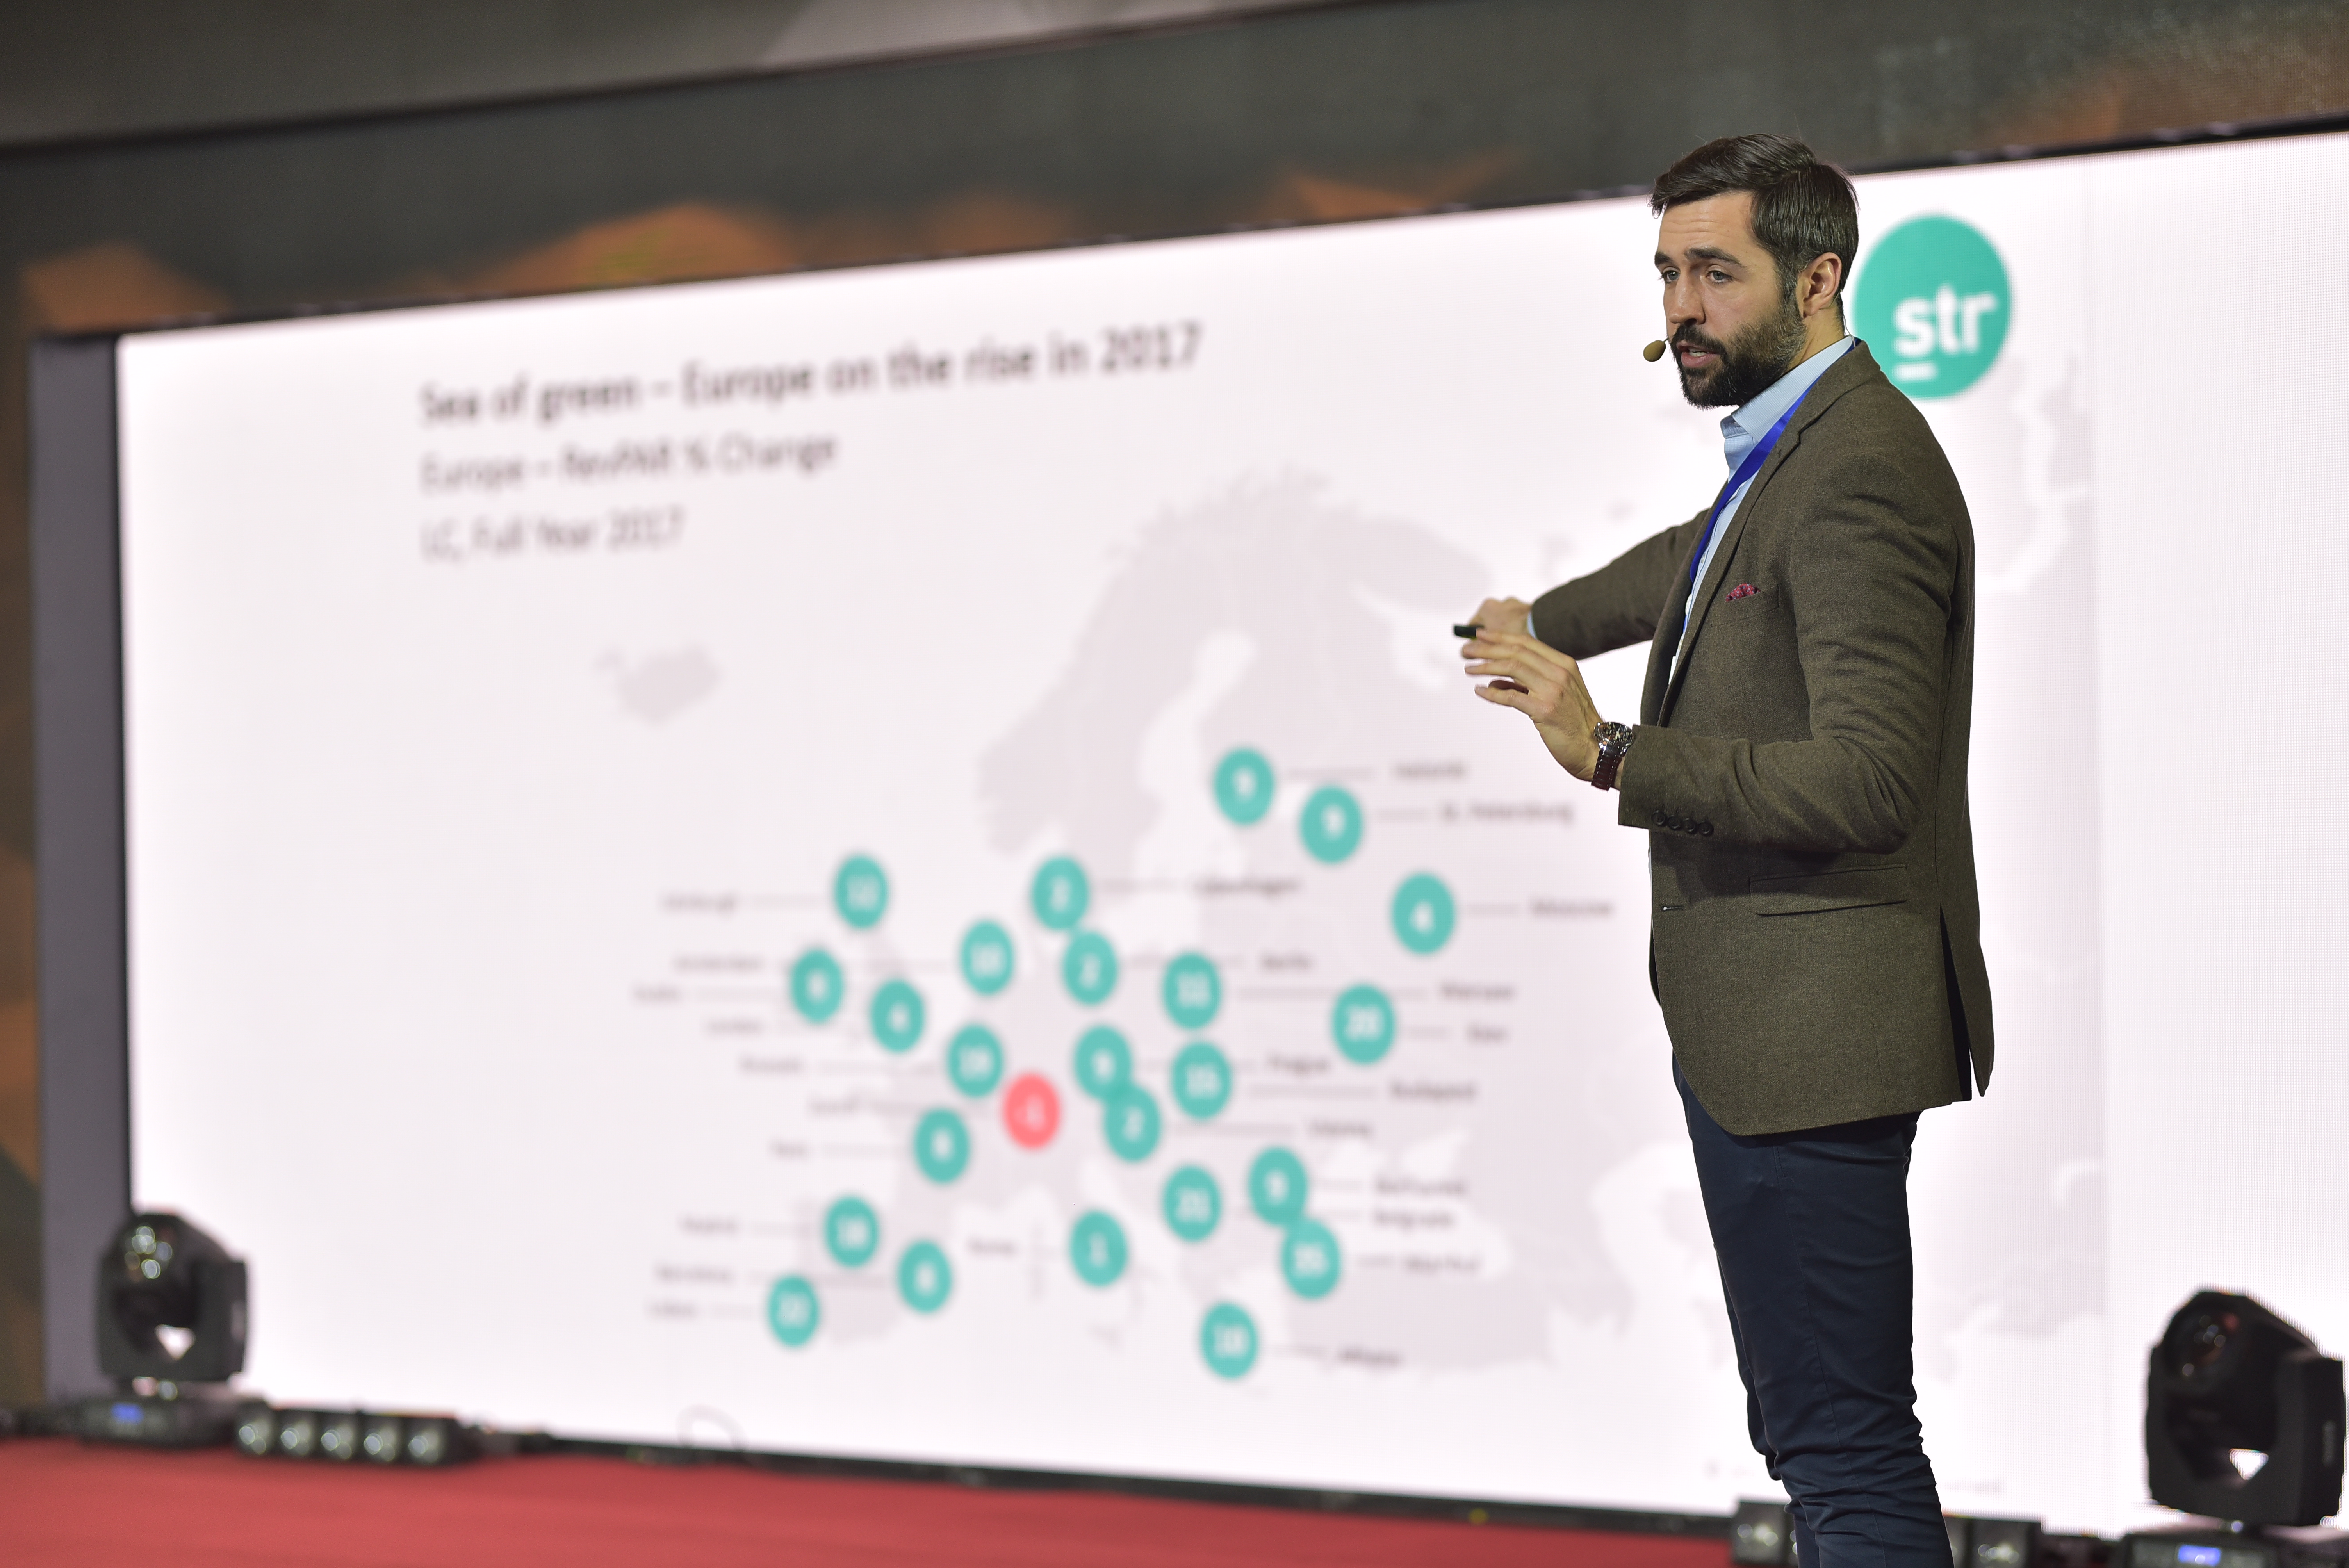 Dennis Spitra, head of business development at STR Global Europe, U.S. researcher that tracks the global hotel industry, talks to the audience of International Hospitality Conference held in InterContinental Kyiv Hotel on Feb. 17.